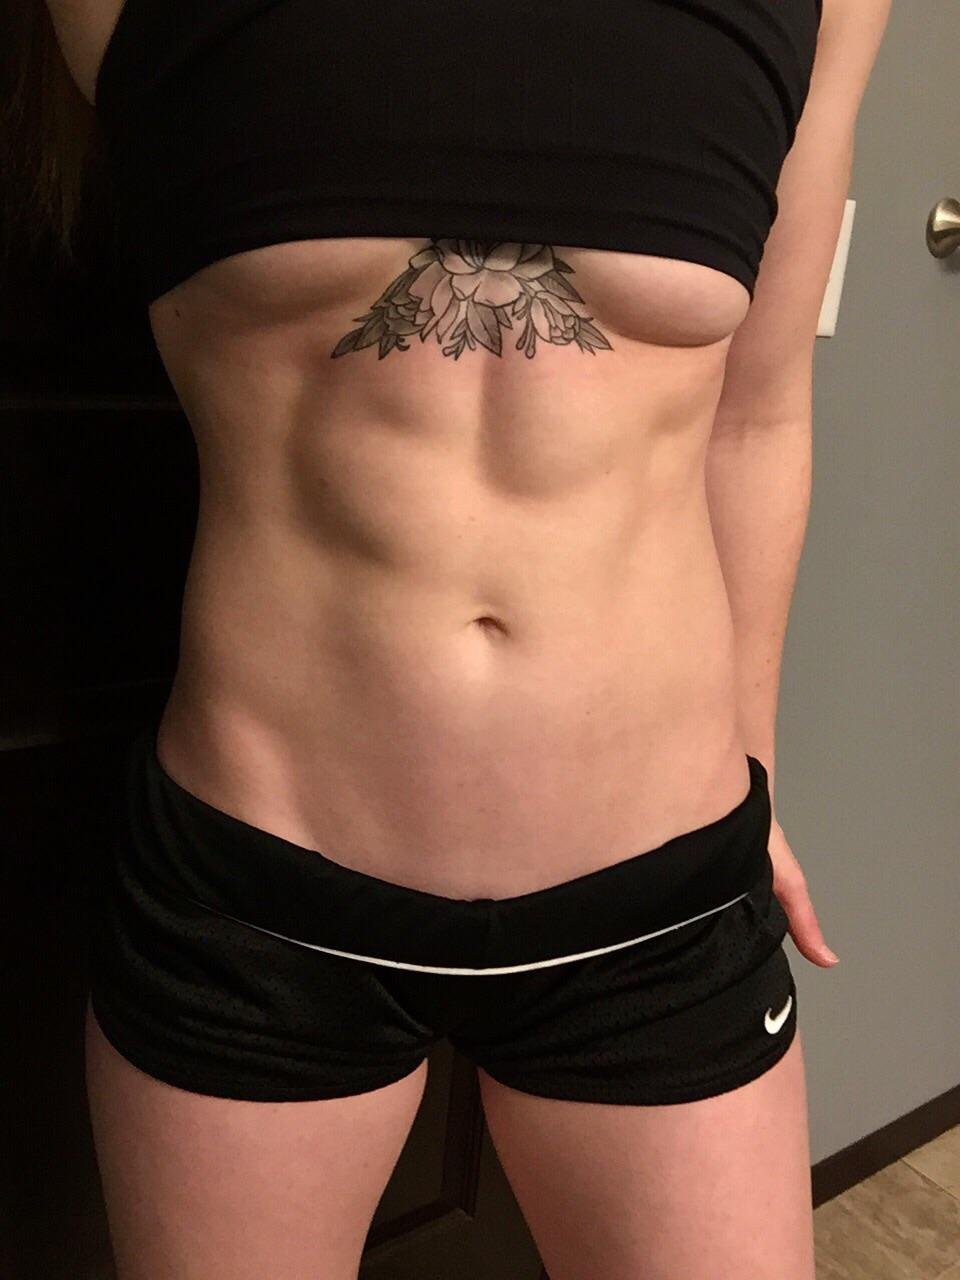 Post turkey day ab check. Am I clear [f]or leftovers?